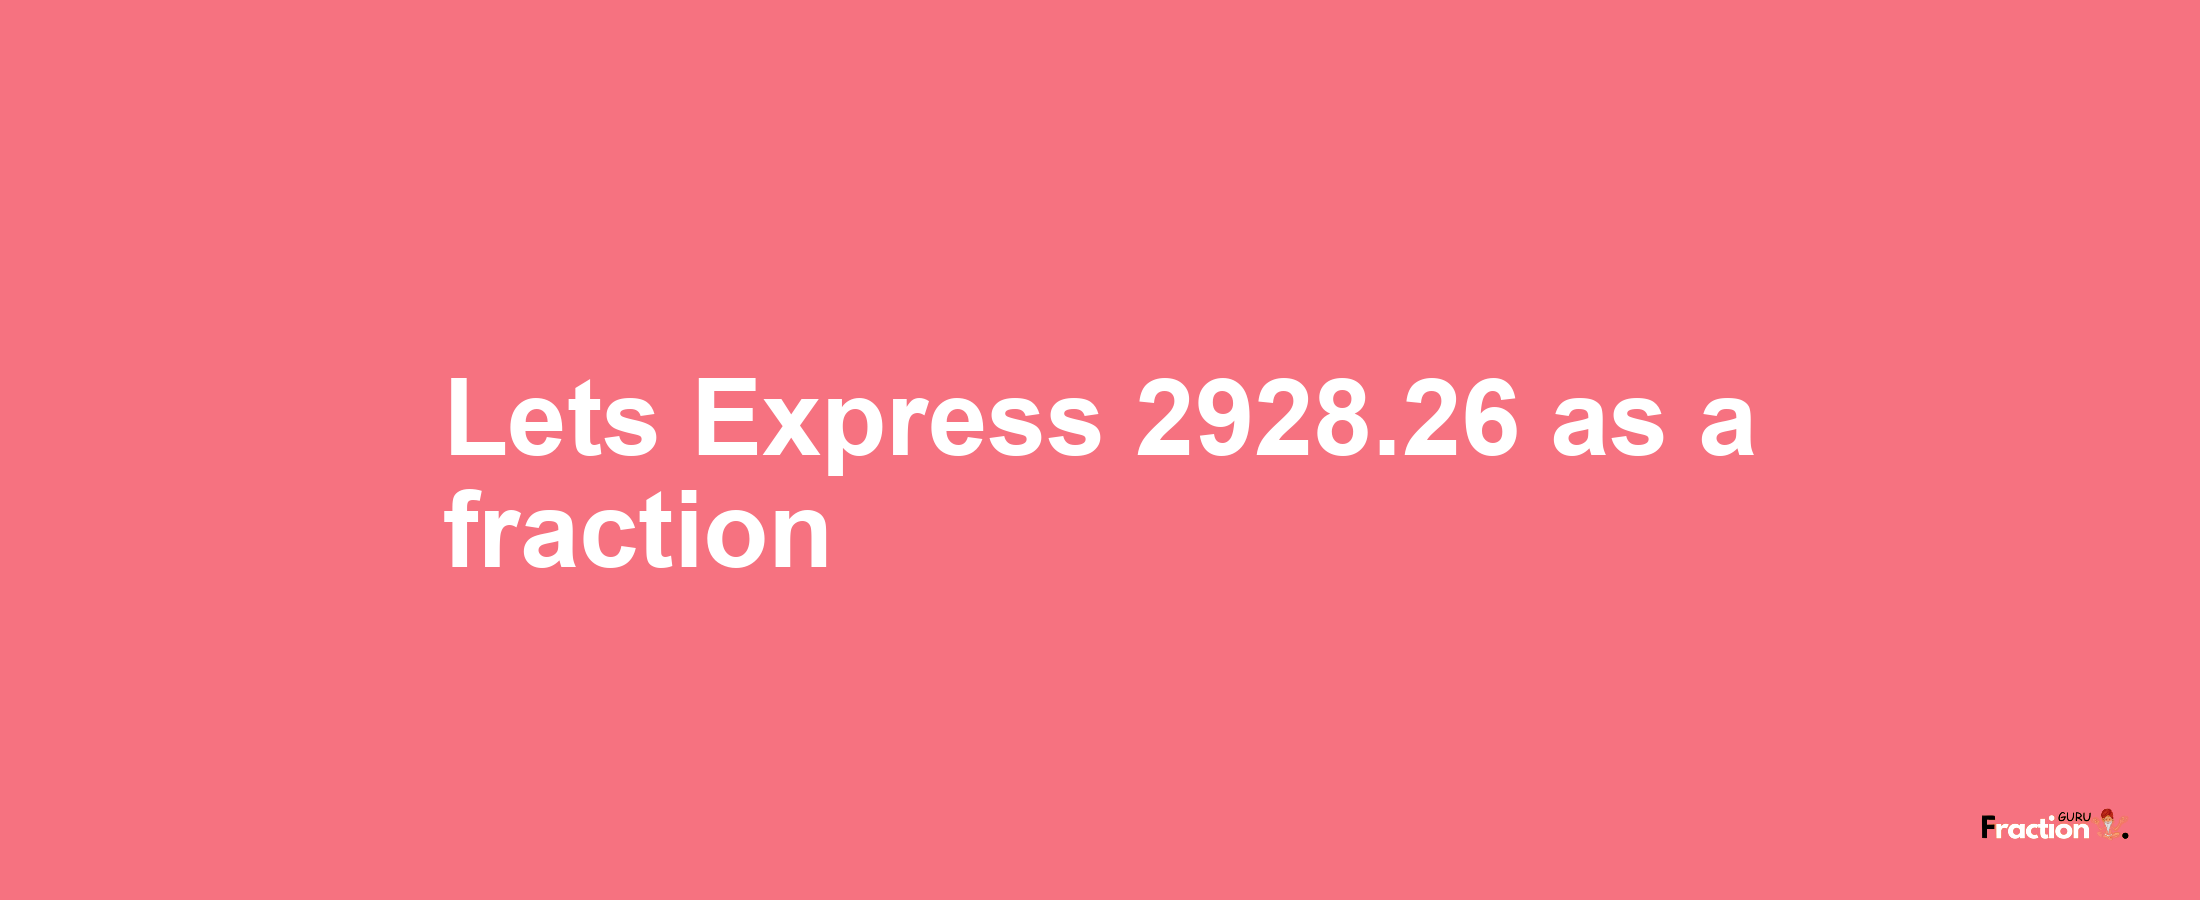 Lets Express 2928.26 as afraction